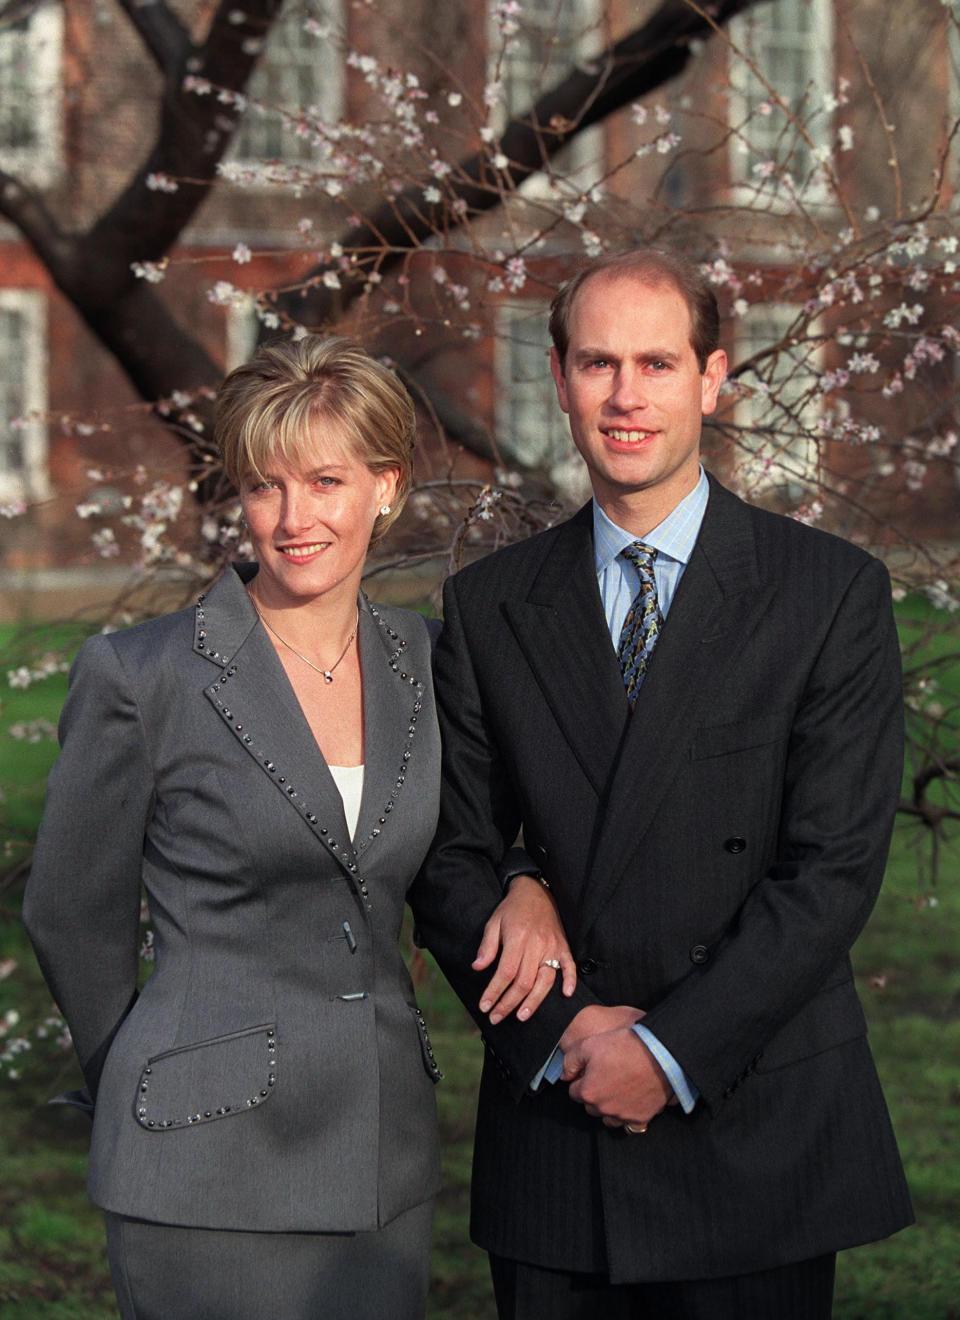 <p>Prince Edward met Sophie Rhys-Jones back in 1993 at a tennis event.<br><br>They became engaged on 6 January 1999 after the young royal proposed with a two-carat oval ring which features two heart-shaped gemstones.<br><br>The ring was made by Asprey and Garrard and reportedly cost £105,000 at the time. <em>[Photo: Getty]</em> </p>